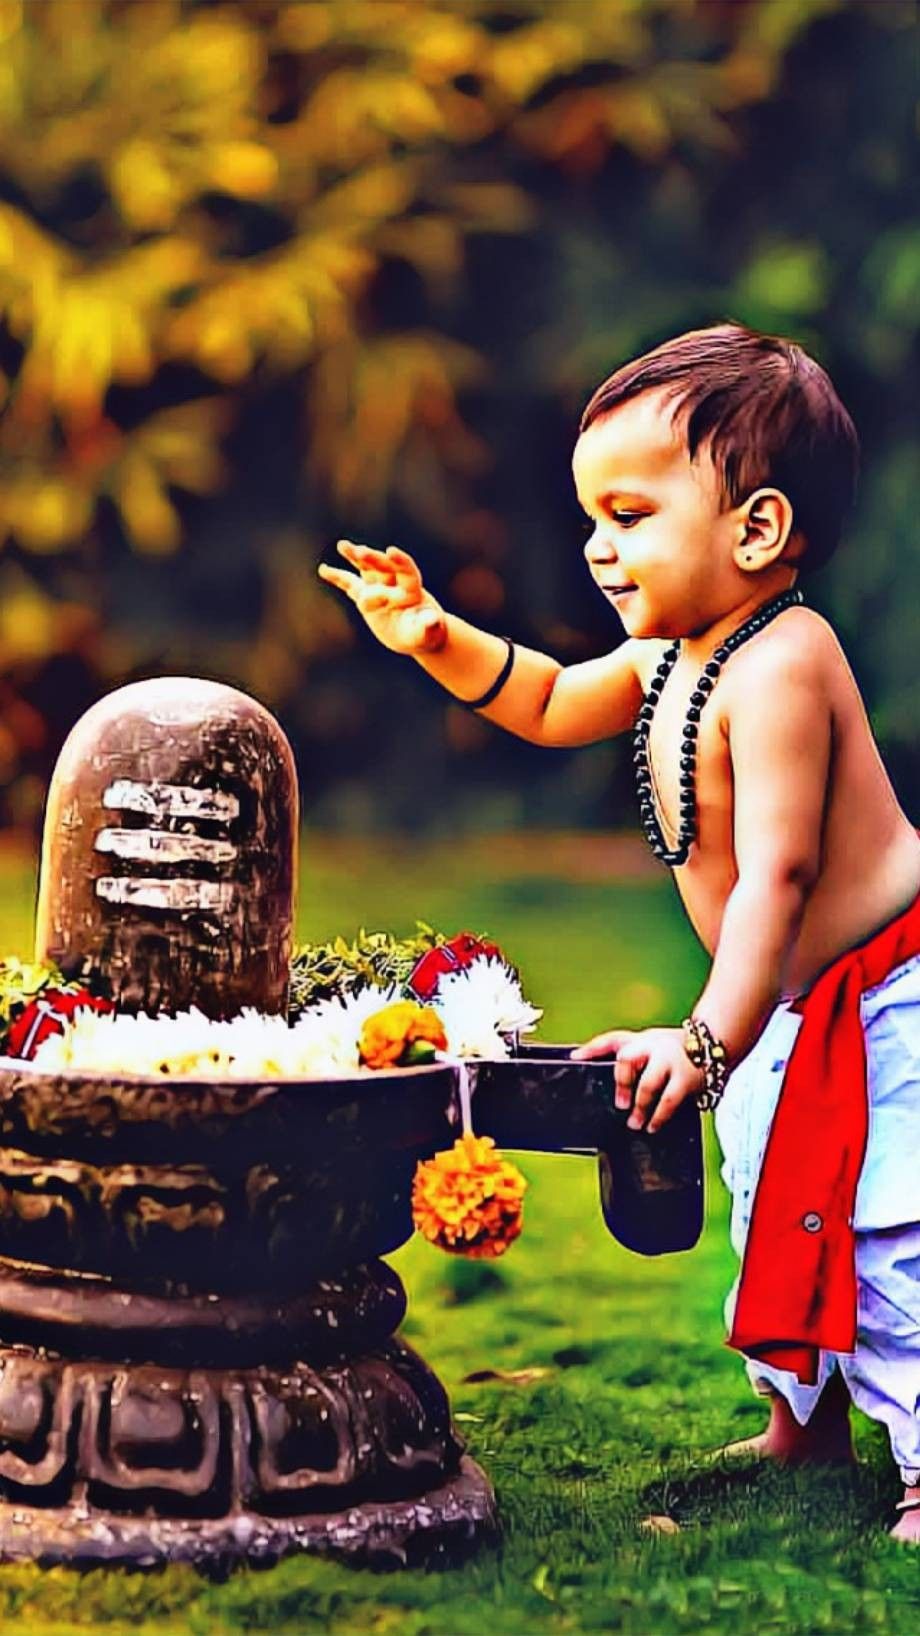 Download Shivling Photos Best Shivling Images Free download directly apk from the google play store or other. download shivling photos best